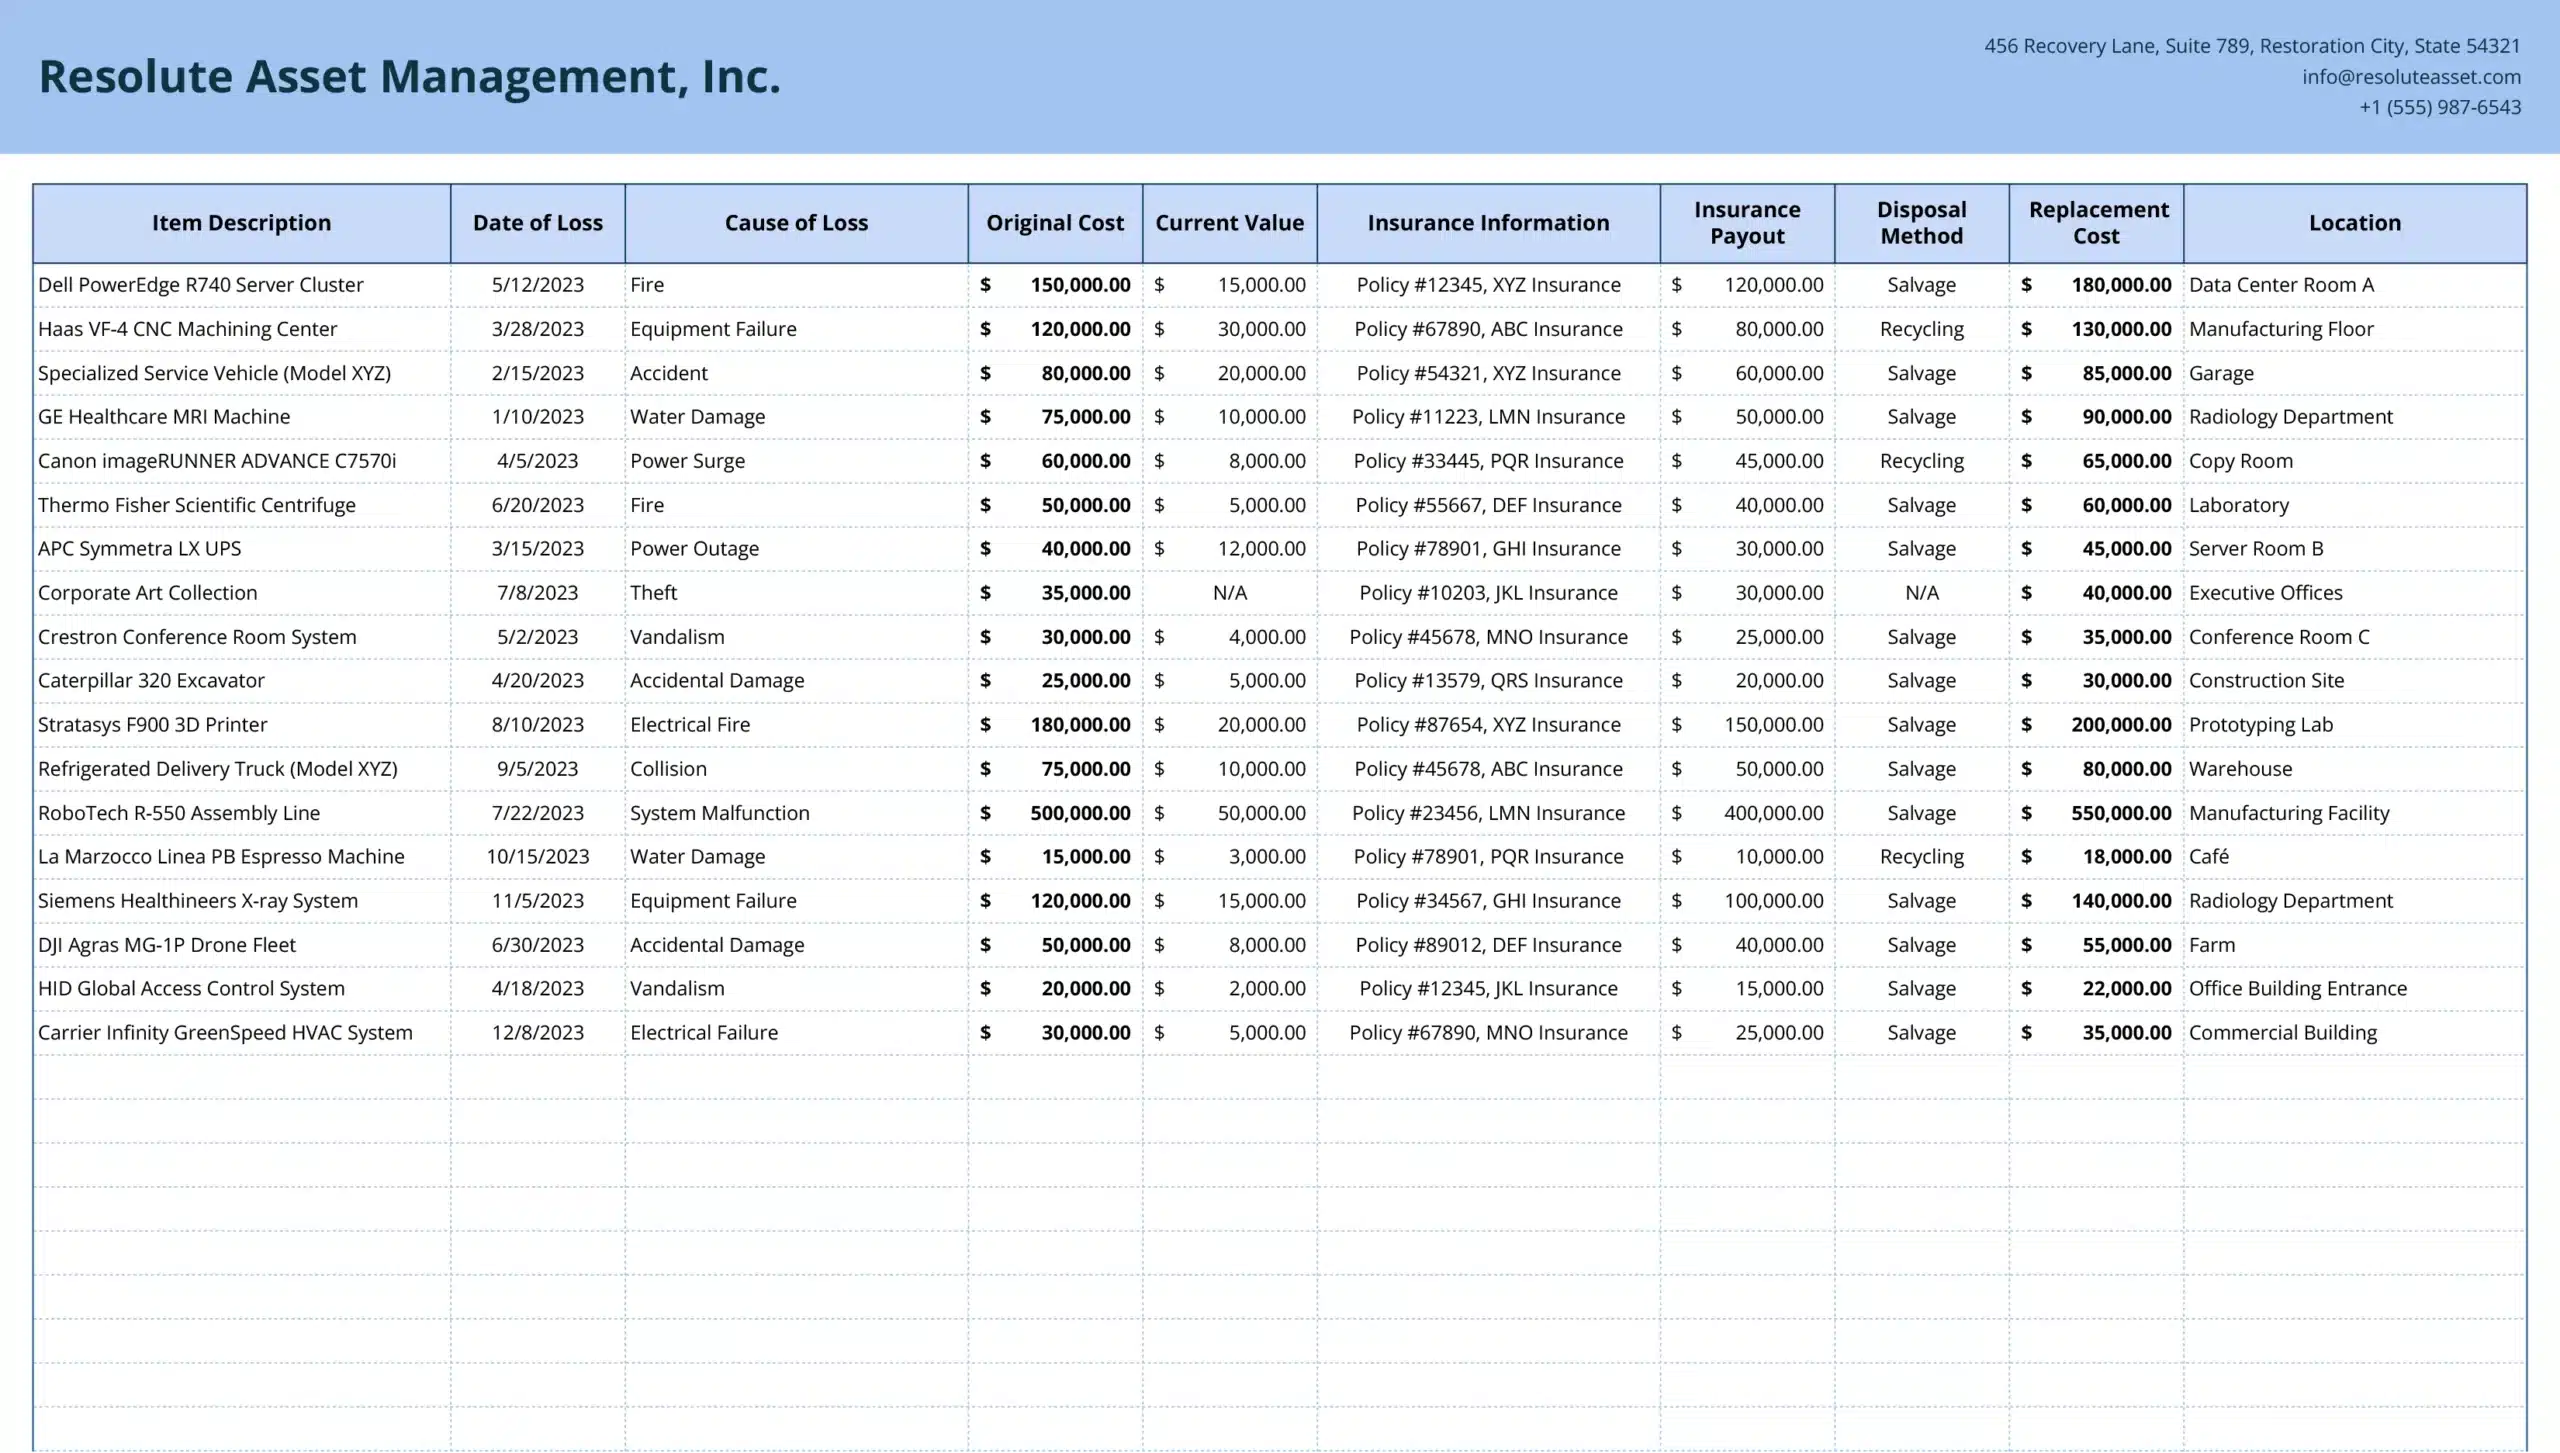 Top 10 office supply inventory list template Excel download 2022